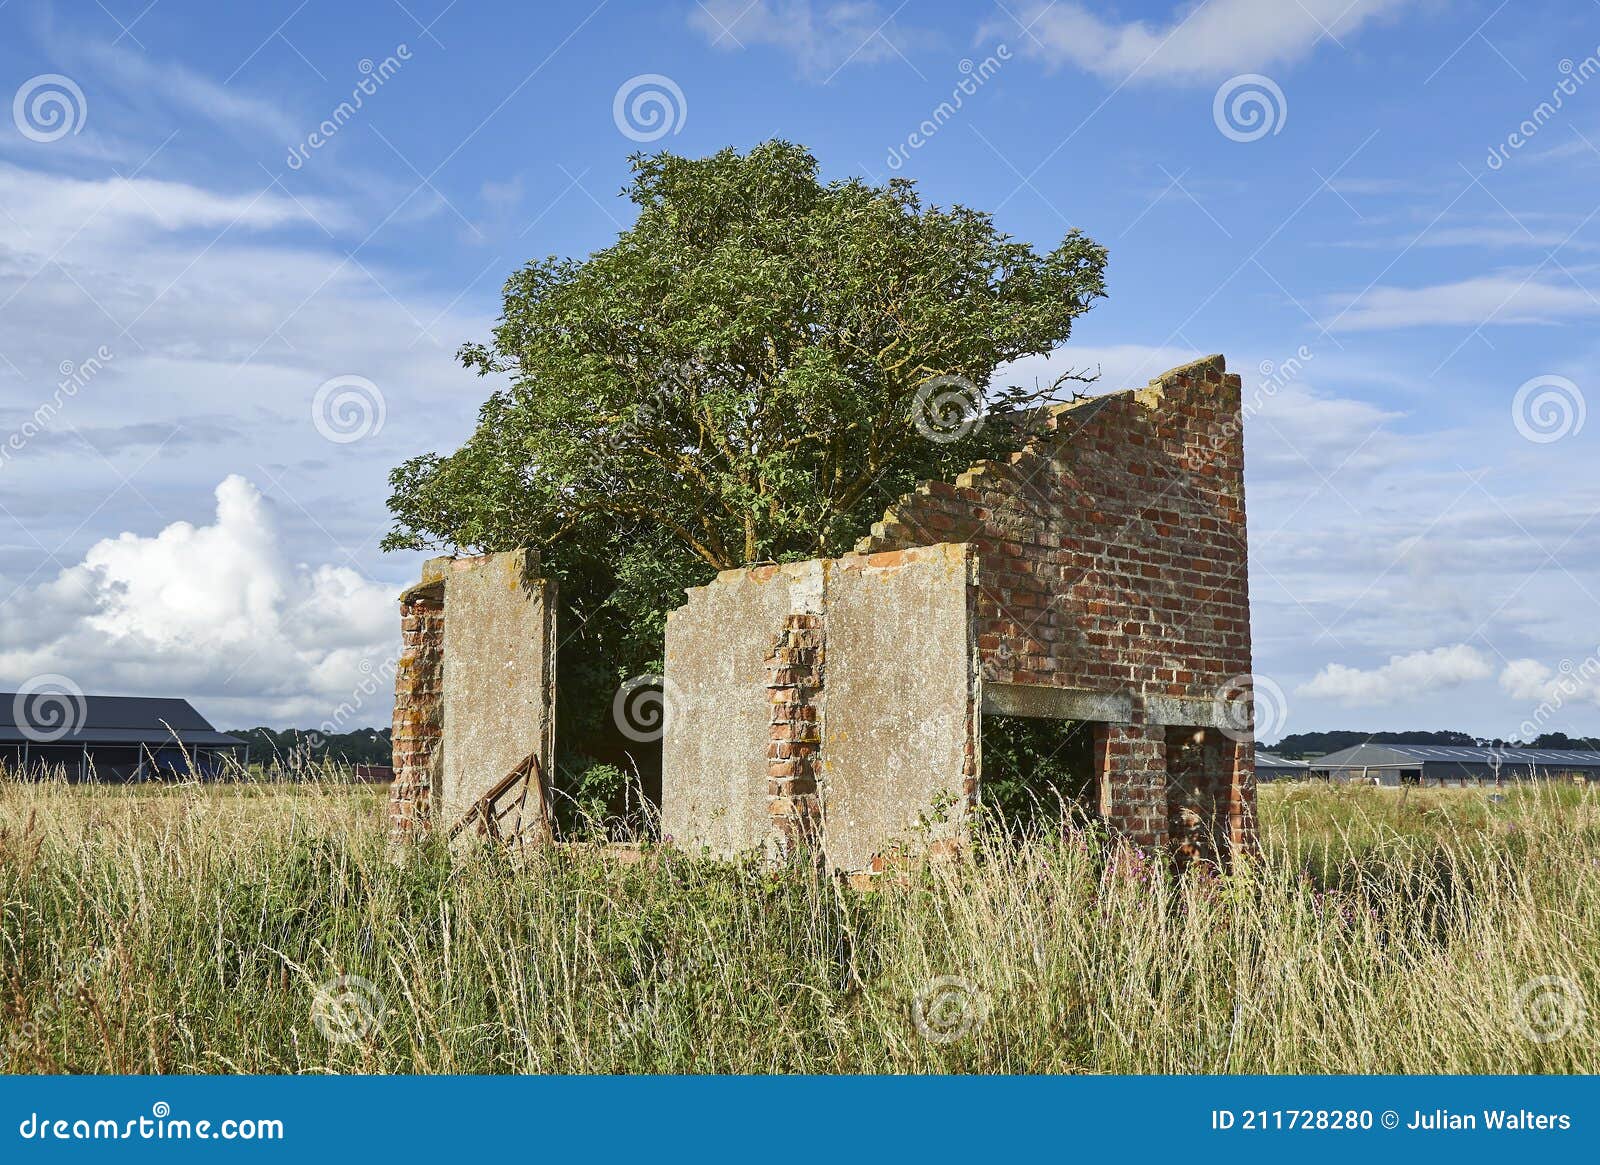 a tree growing out of the ruins of an old abandoned wartime airfield building sited at raf kinnell .